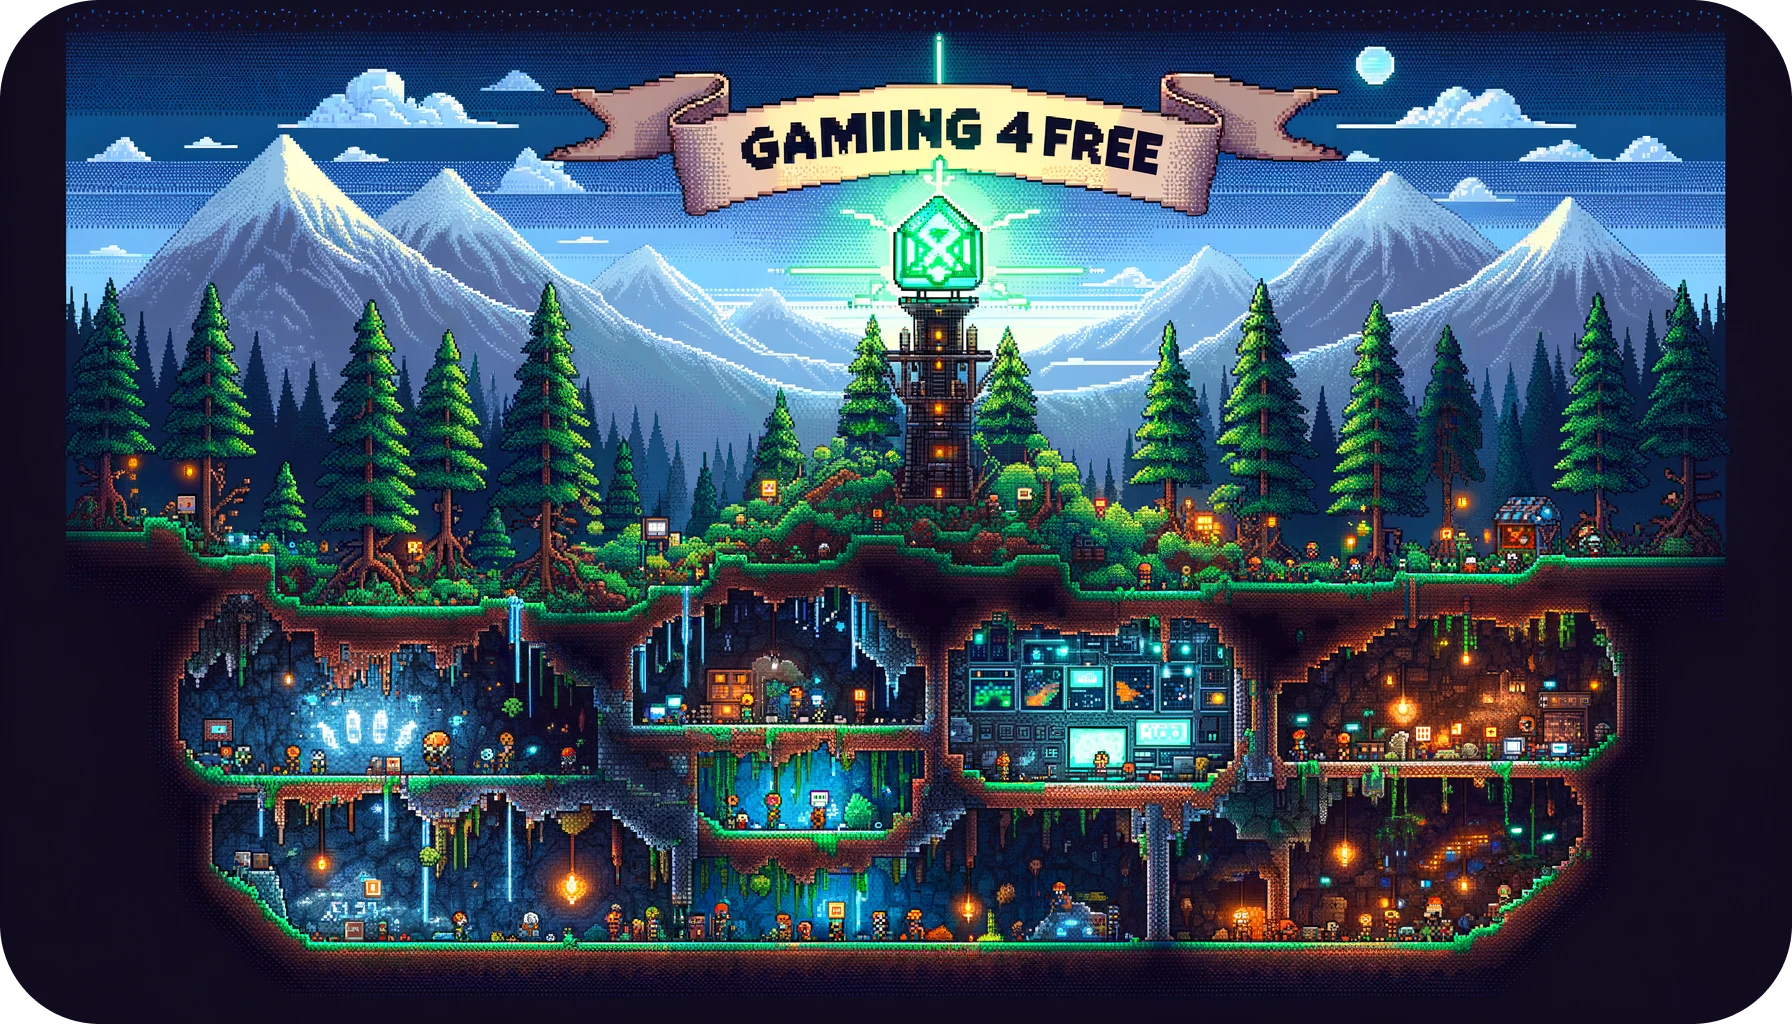 A pixel art landscape with forests, mountains, and underground caverns, centered around a glowing server tower.